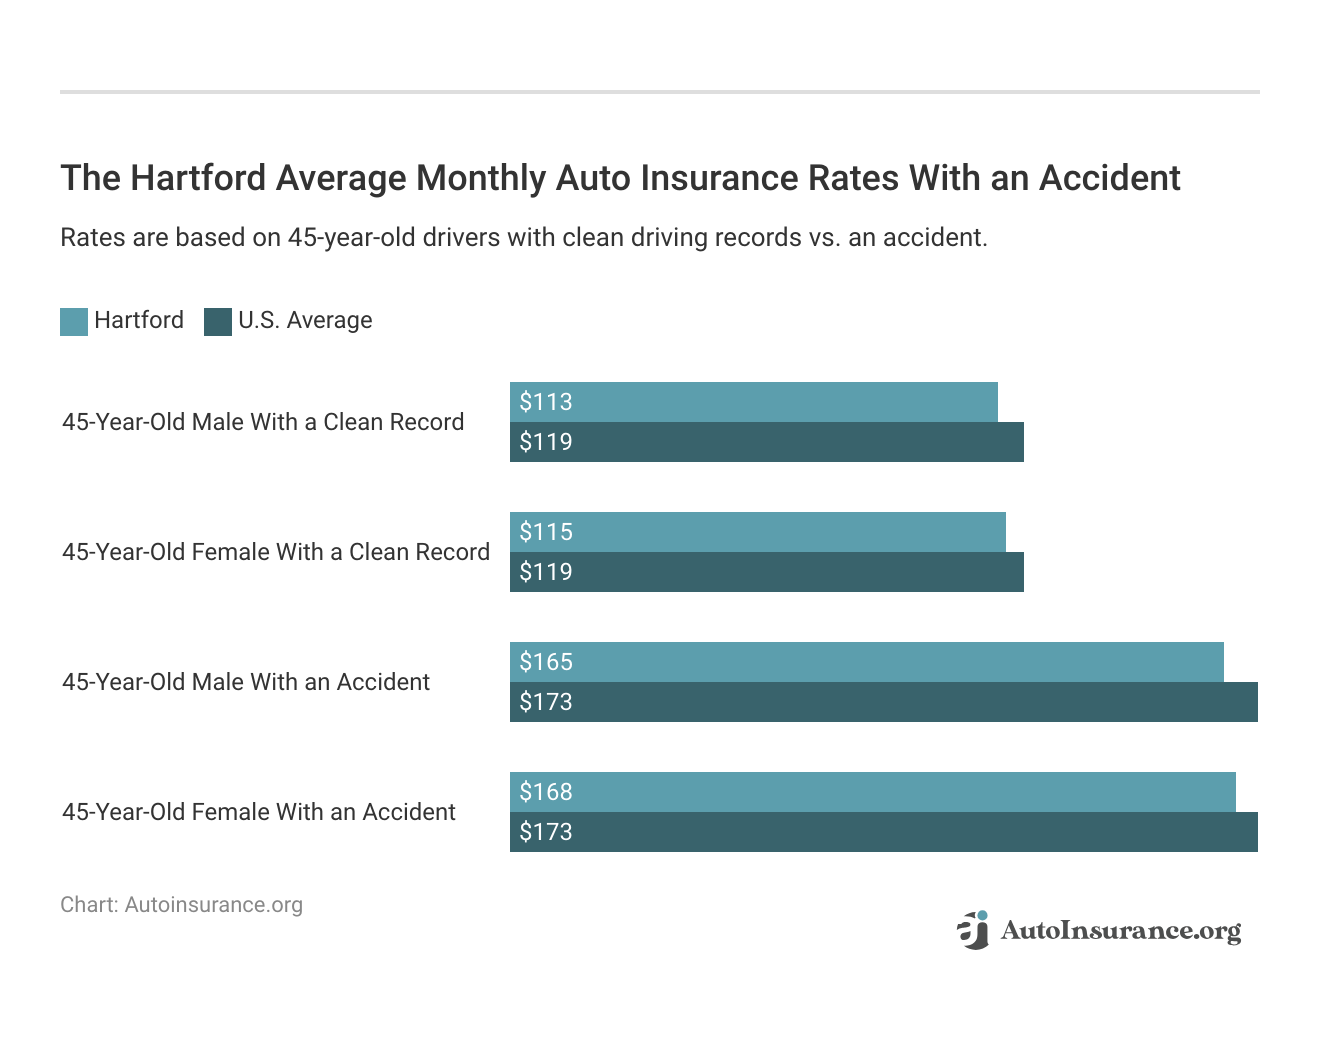 <h3>The Hartford Average Monthly Auto Insurance Rates With an Accident</h3>